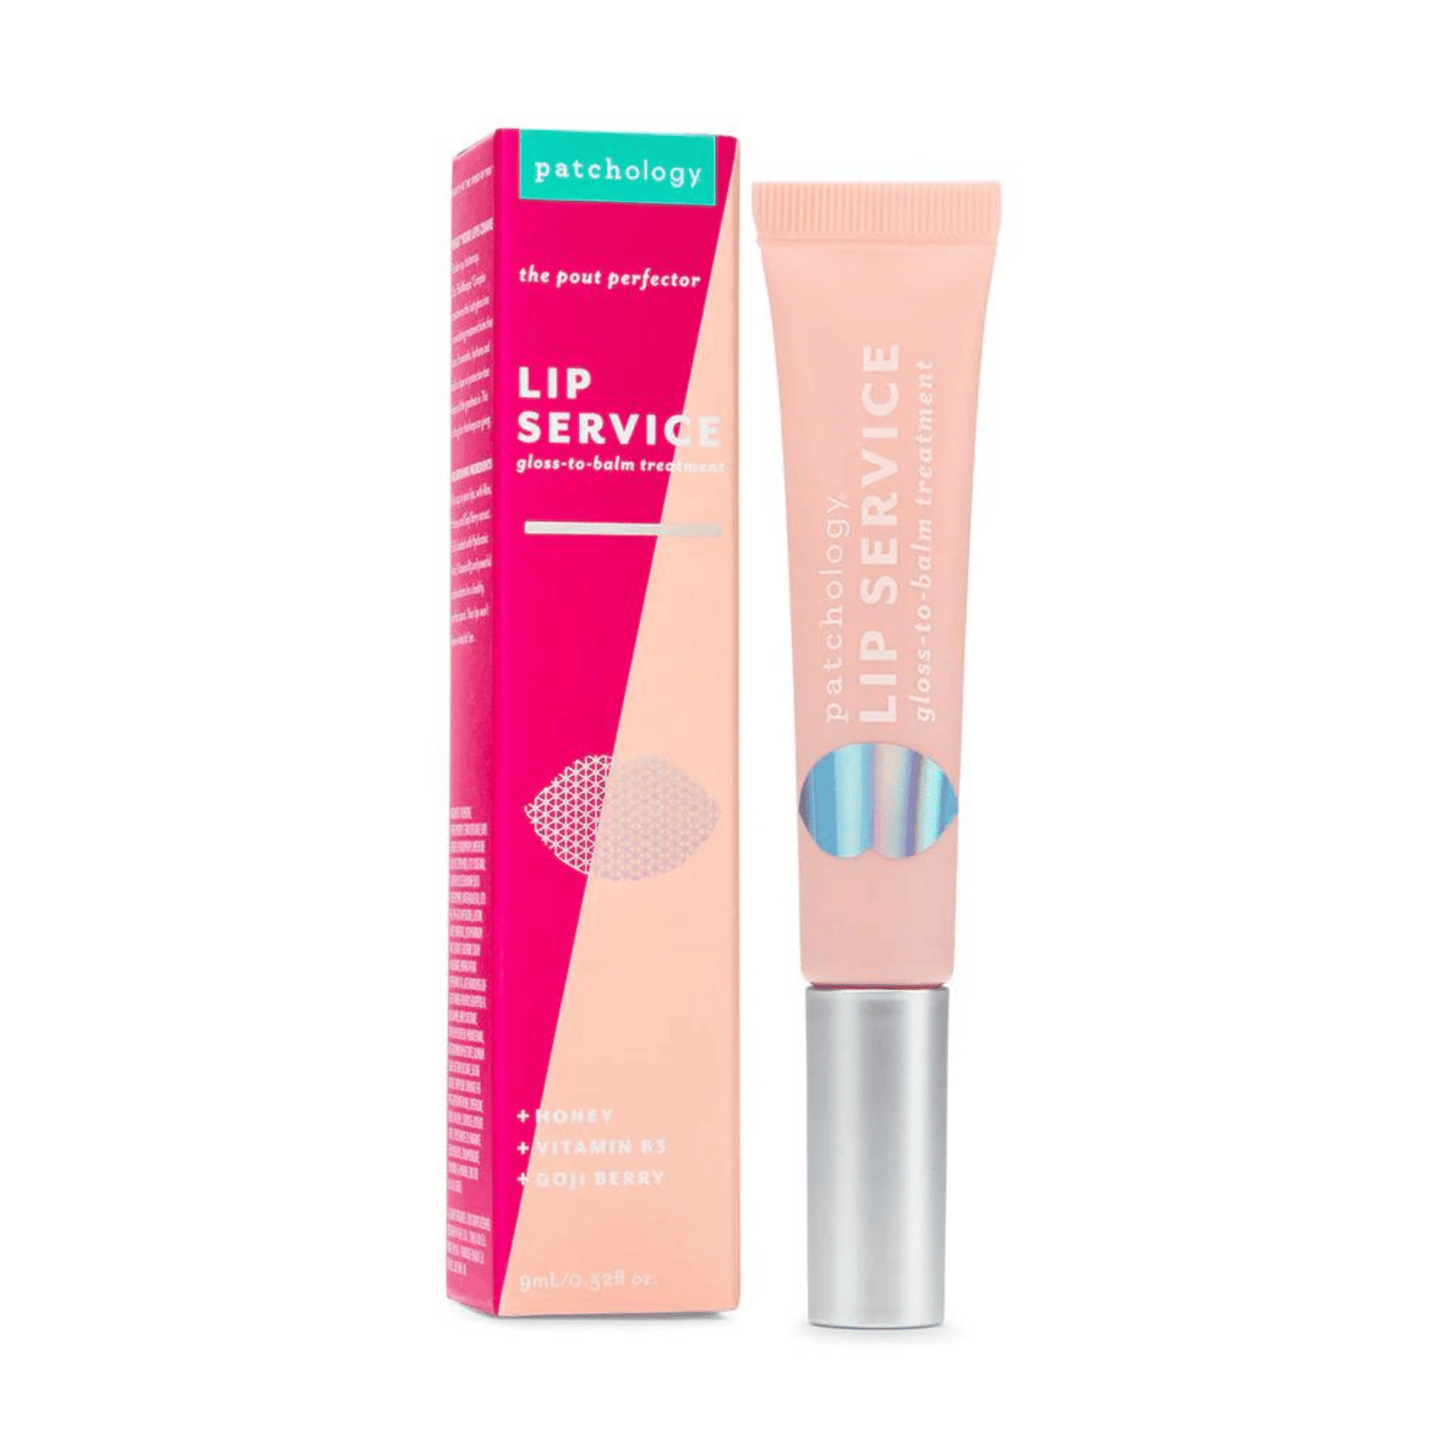 Primary Image of Lip Service Gloss to Balm Treatment